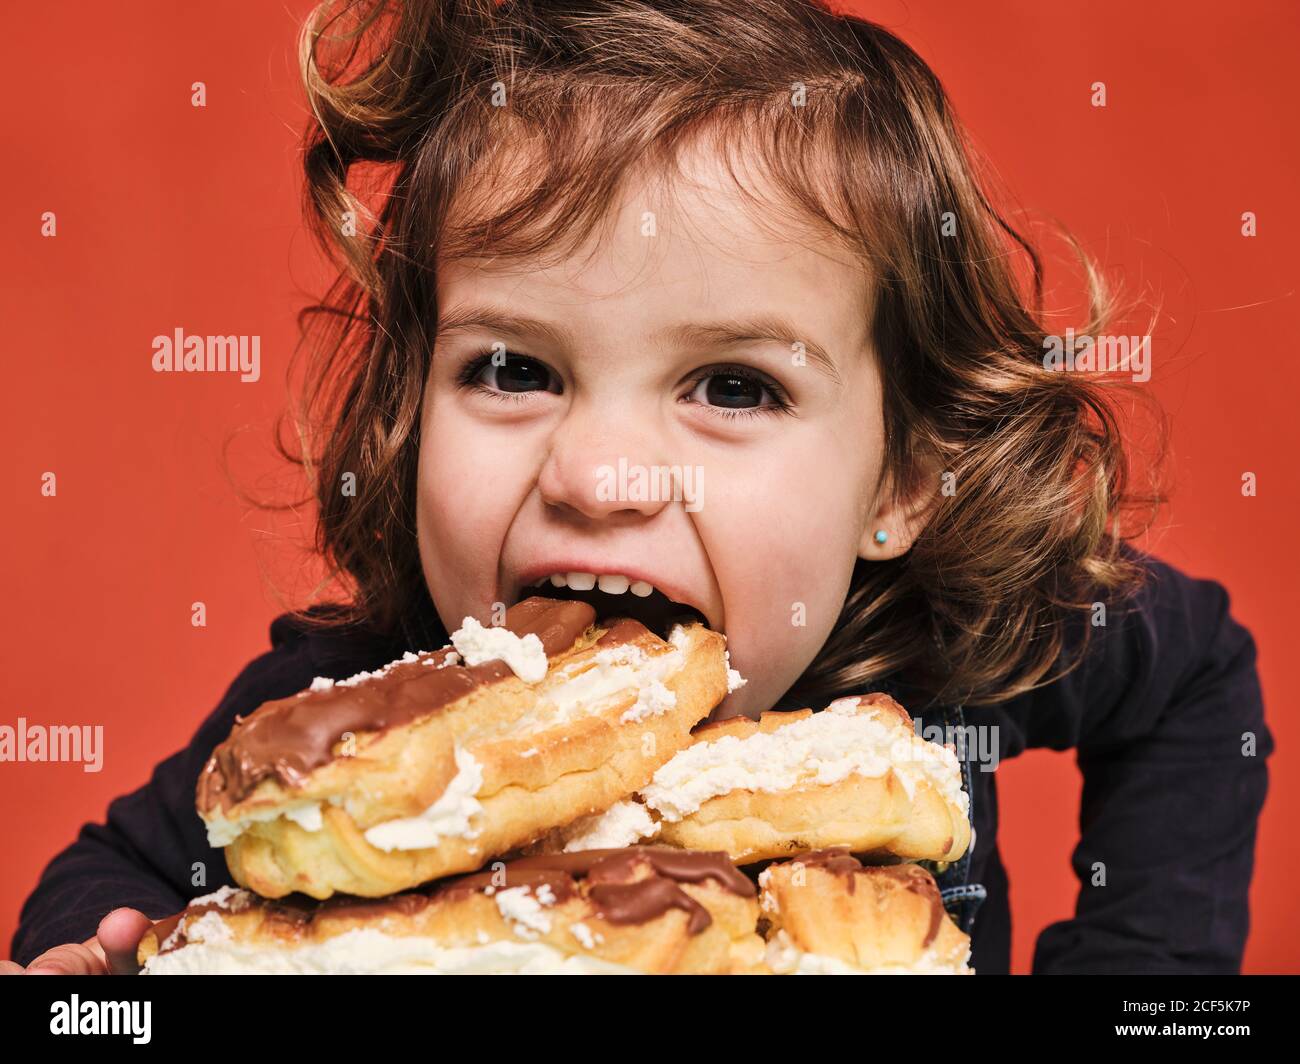 Closeup portrait of cheerful little girl enjoying sweet eclairs with chocolate while looking at camera against red background Stock Photo